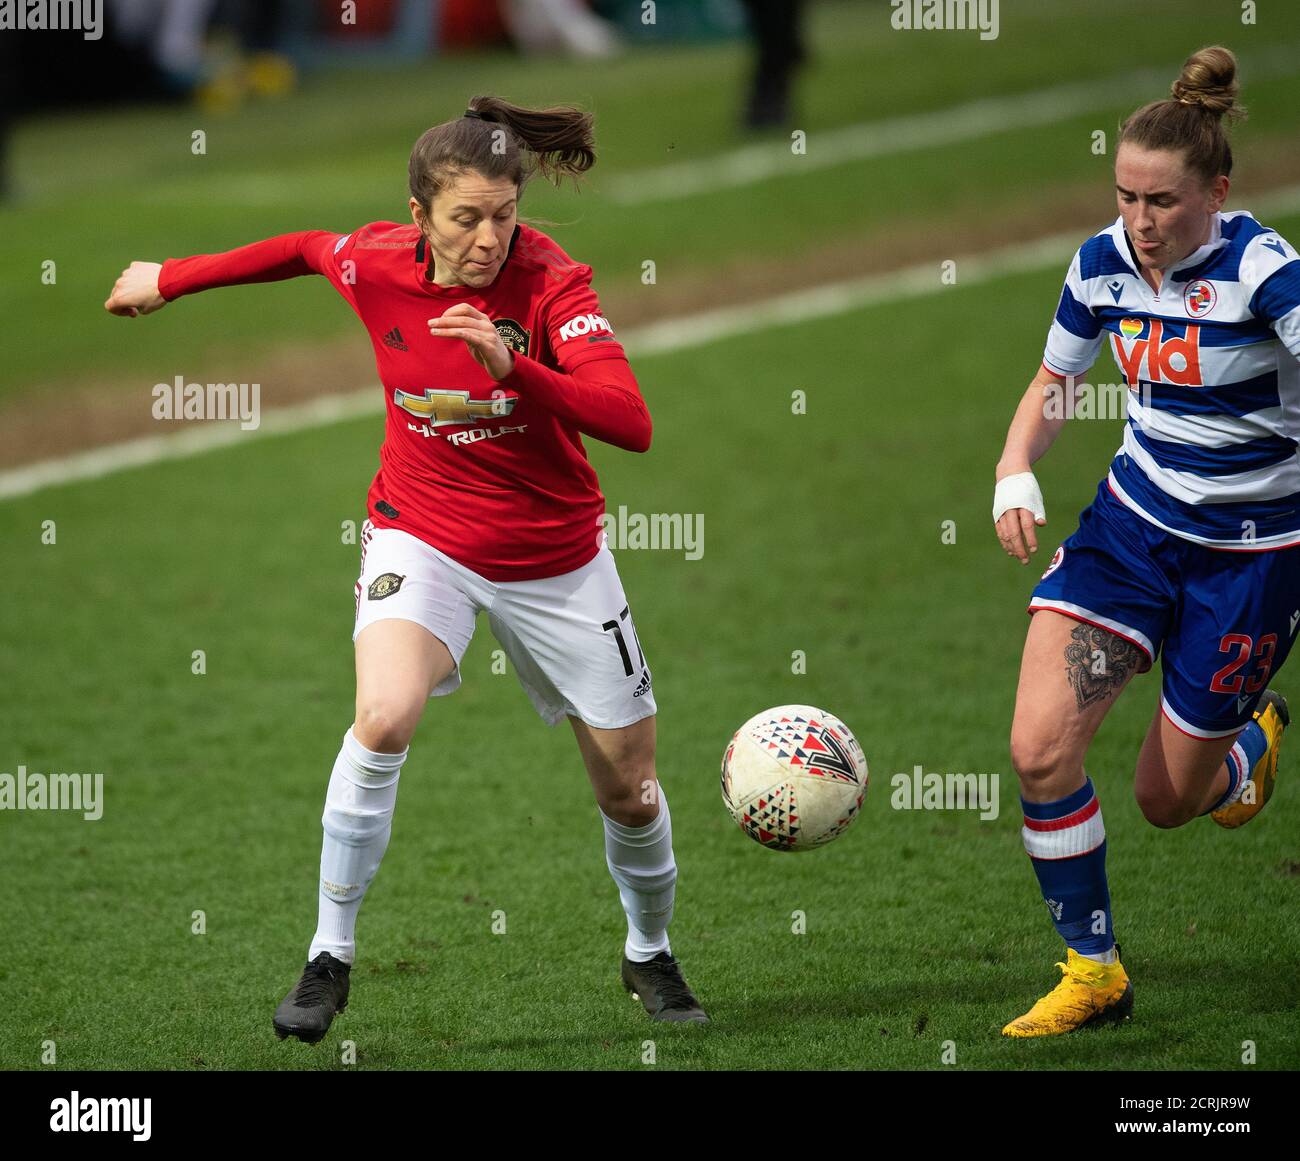 Manchester United's Lizzie Arnot PHOTO CREDIT : © MARK PAIN / ALAMY STOCK PHOTO Foto Stock